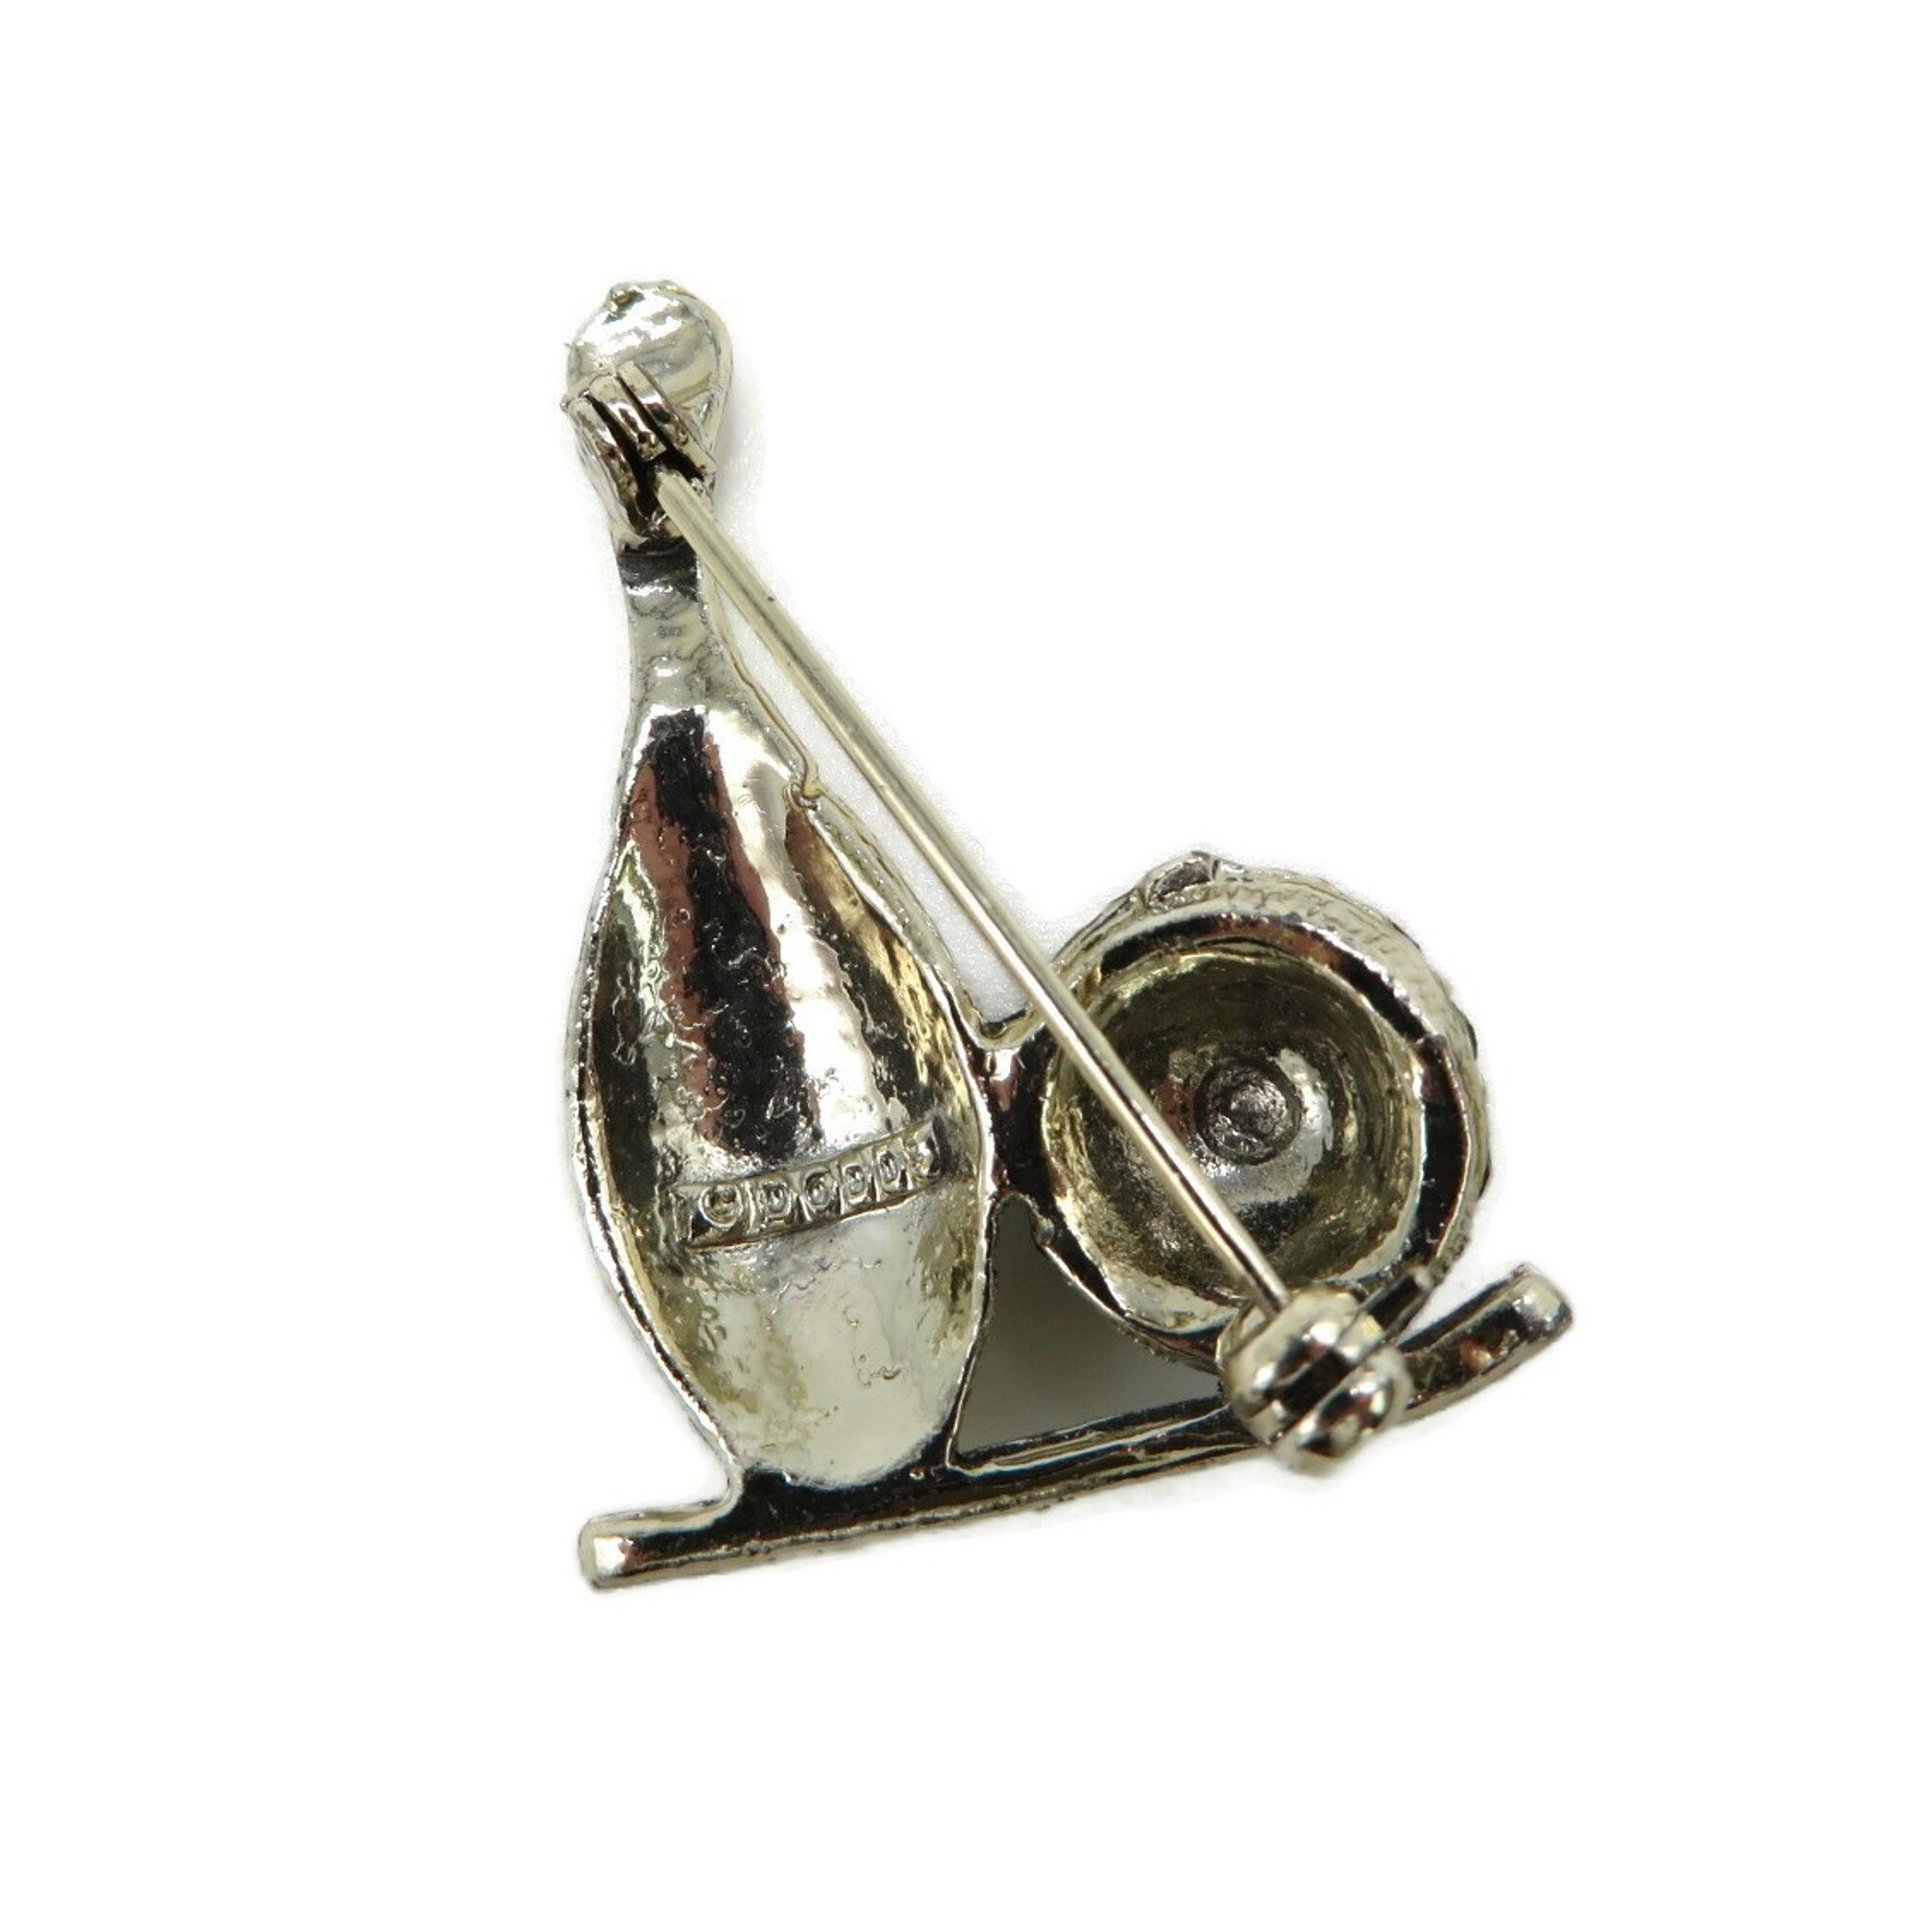 Dodds Bowling Ball and Pin Brooch